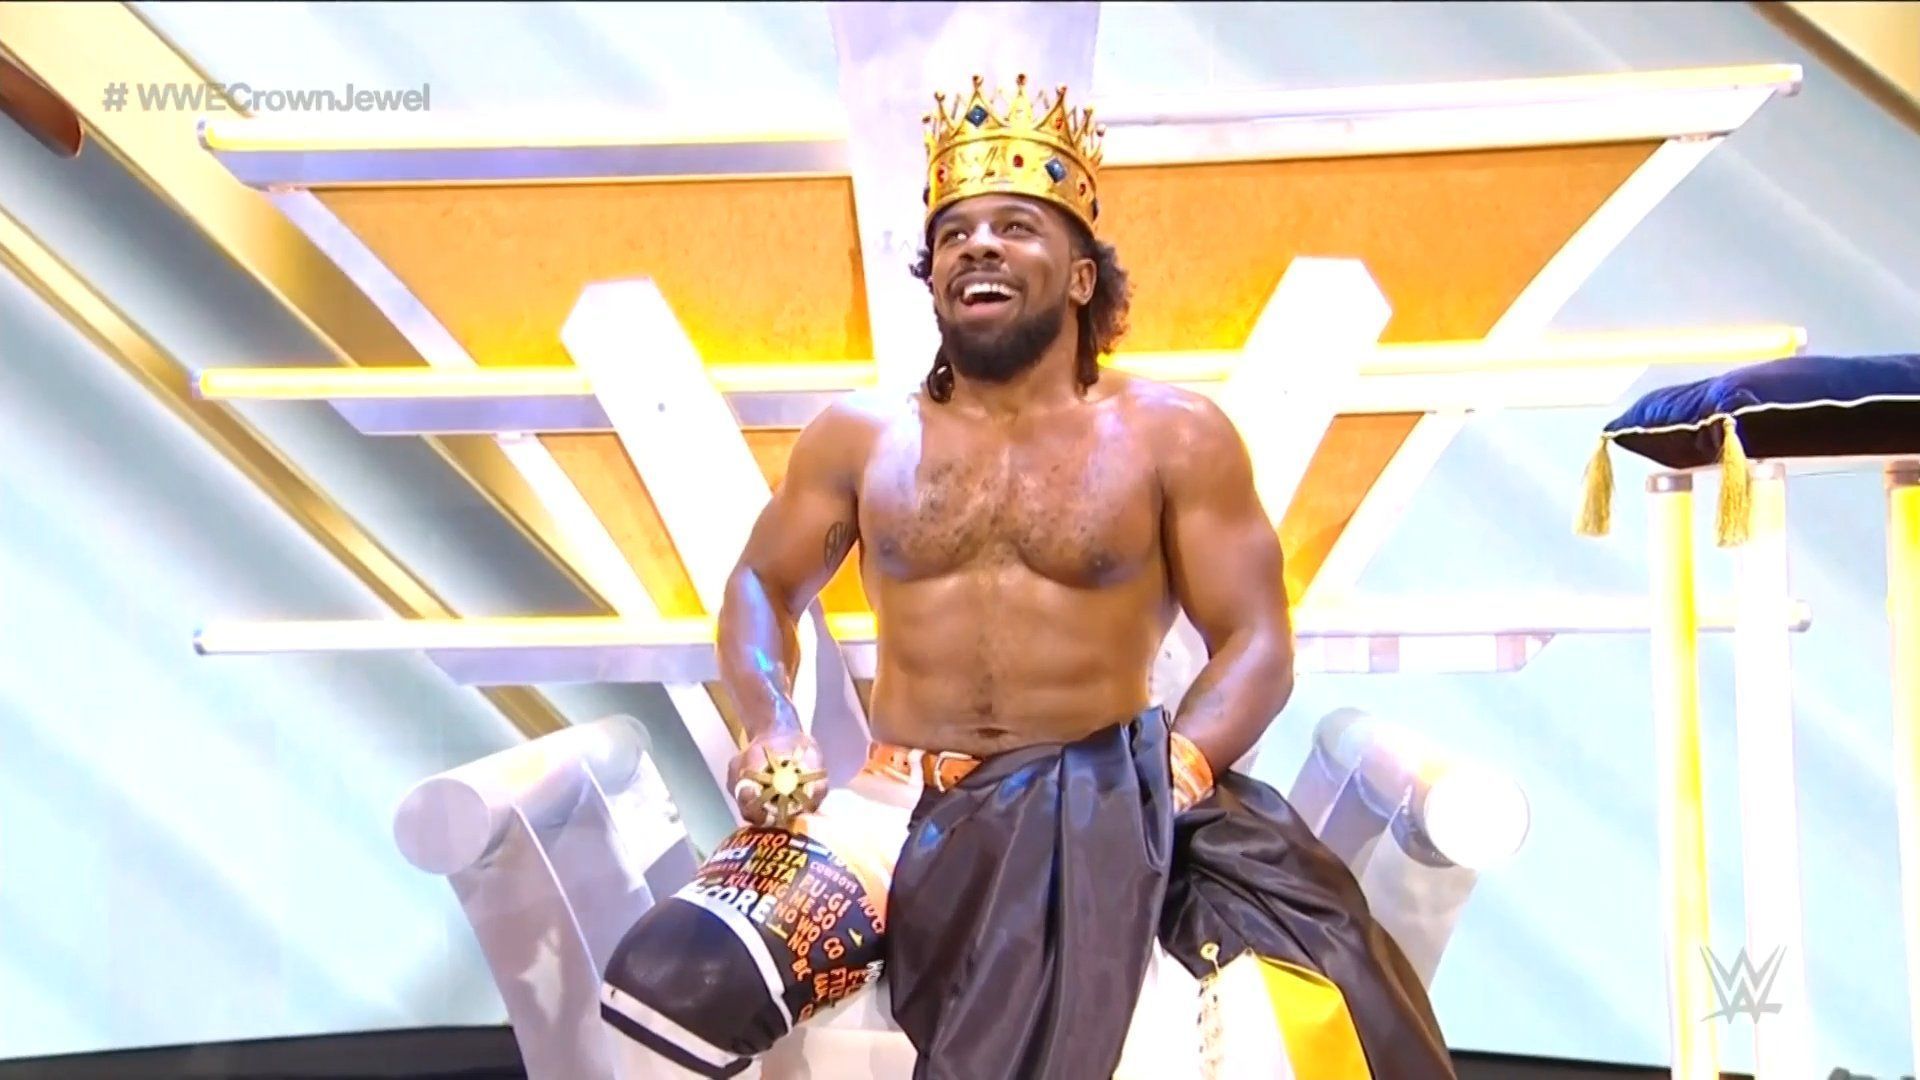 Xavier Woods is the current King of the Ring